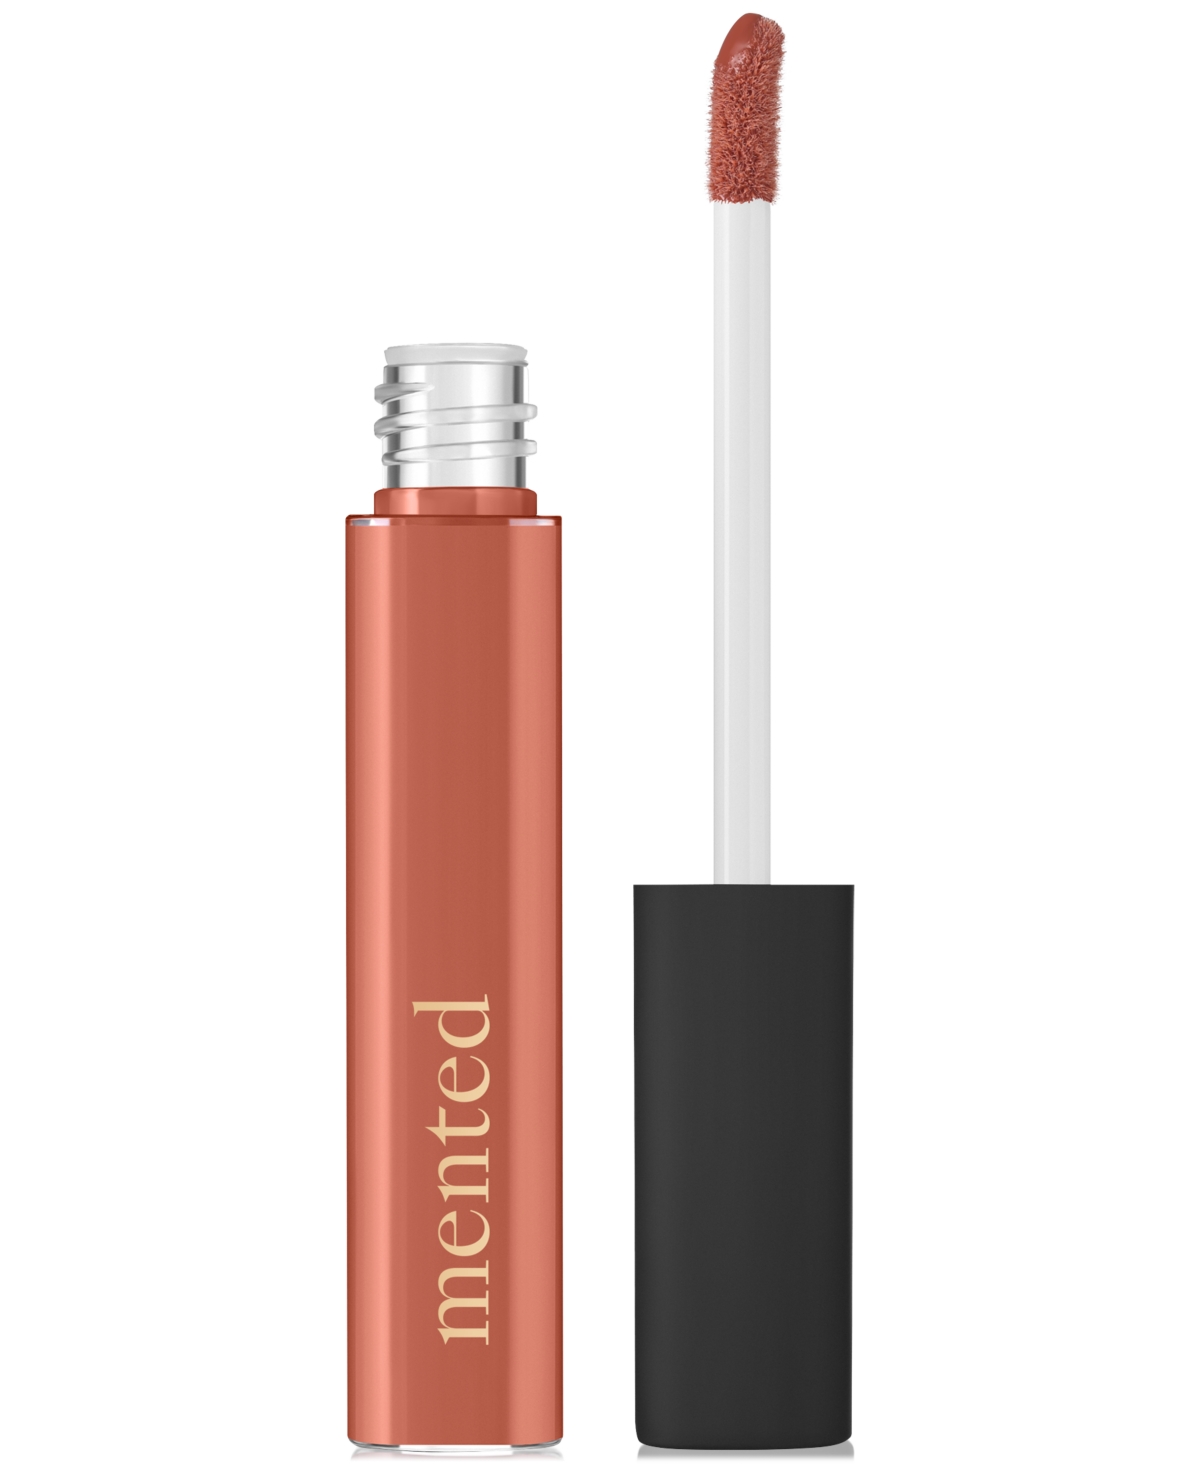 Mented Cosmetics Lip Gloss In Coralition- Warm Coral